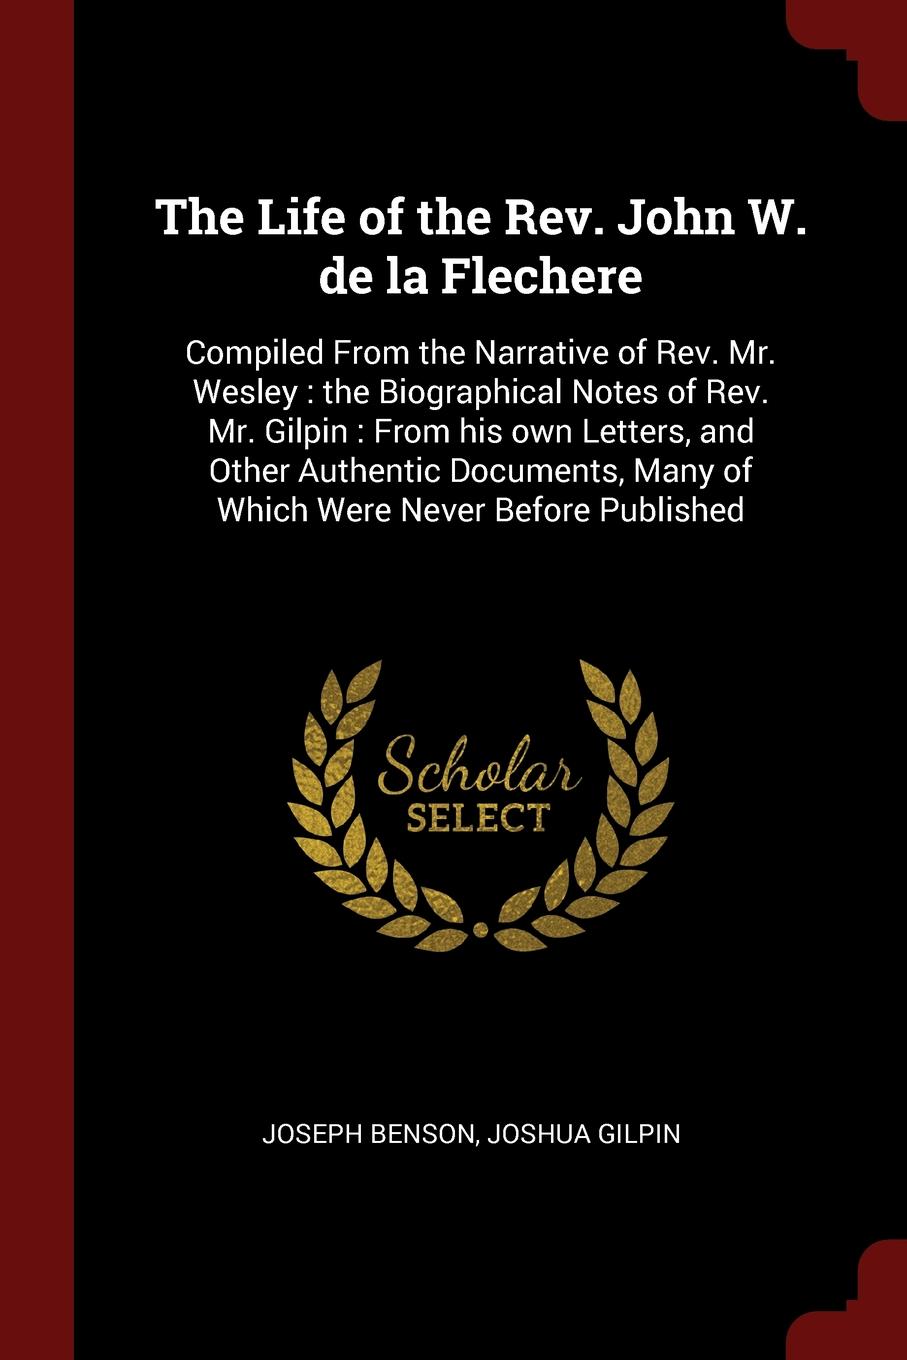 The Life of the Rev. John W. de la Flechere. Compiled From the Narrative of Rev. Mr. Wesley : the Biographical Notes of Rev. Mr. Gilpin : From his own Letters, and Other Authentic Documents, Many of Which Were Never Before Published